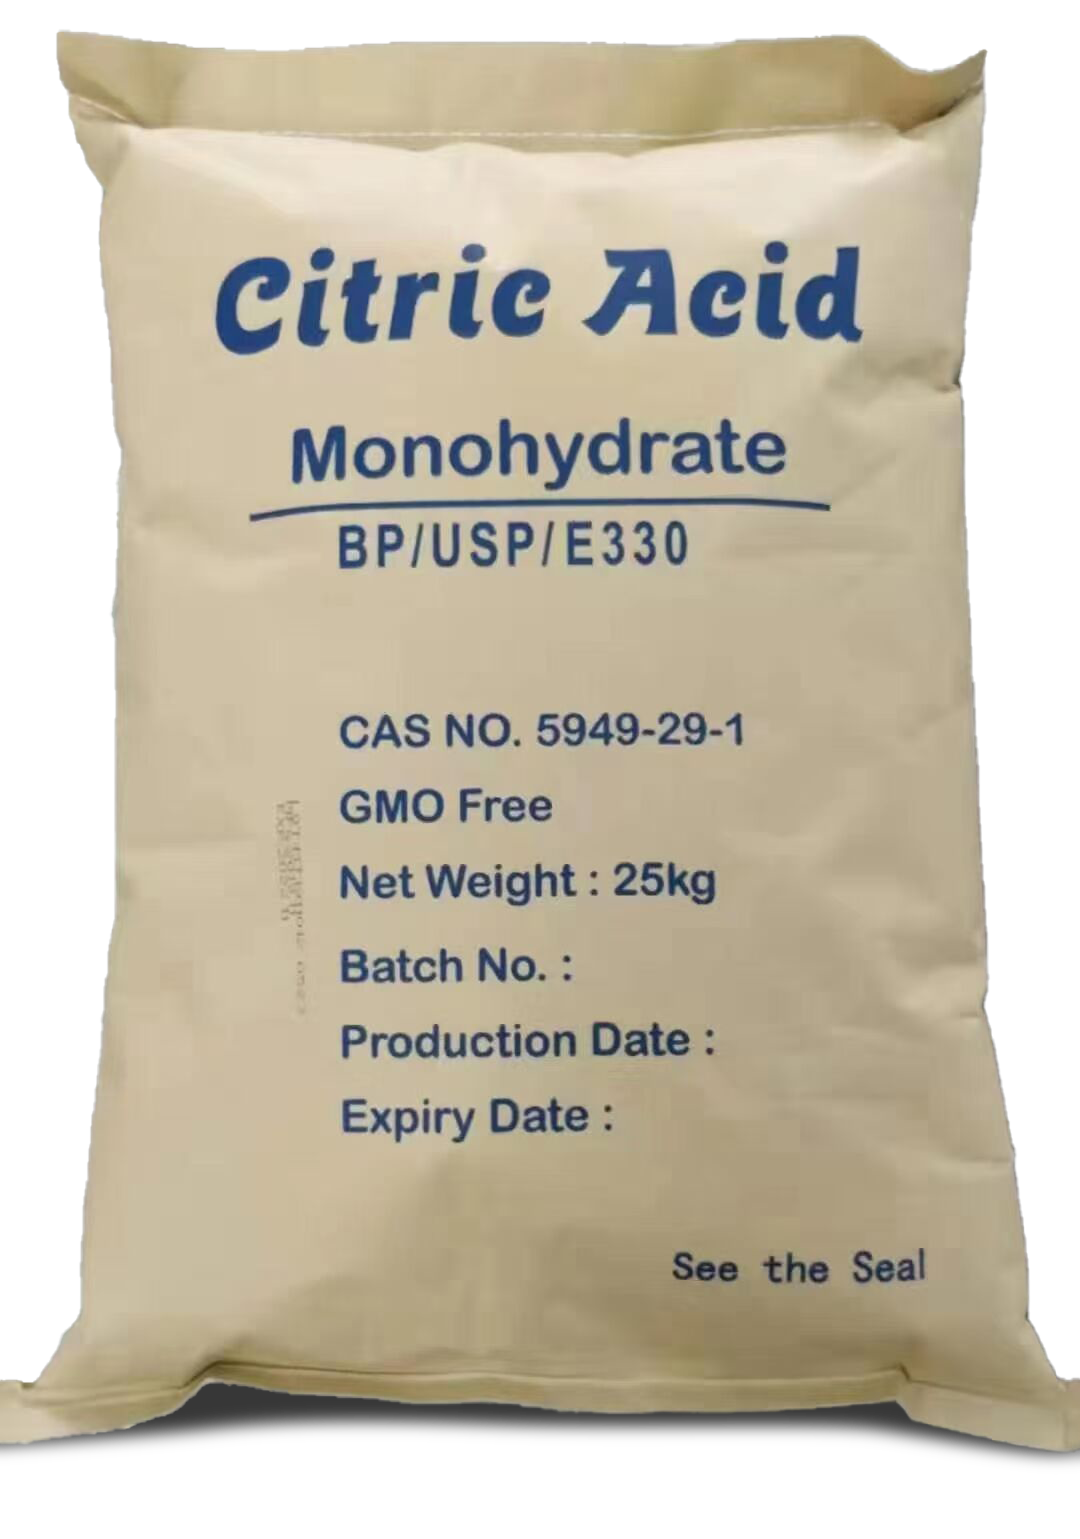 Package of Citric Acid